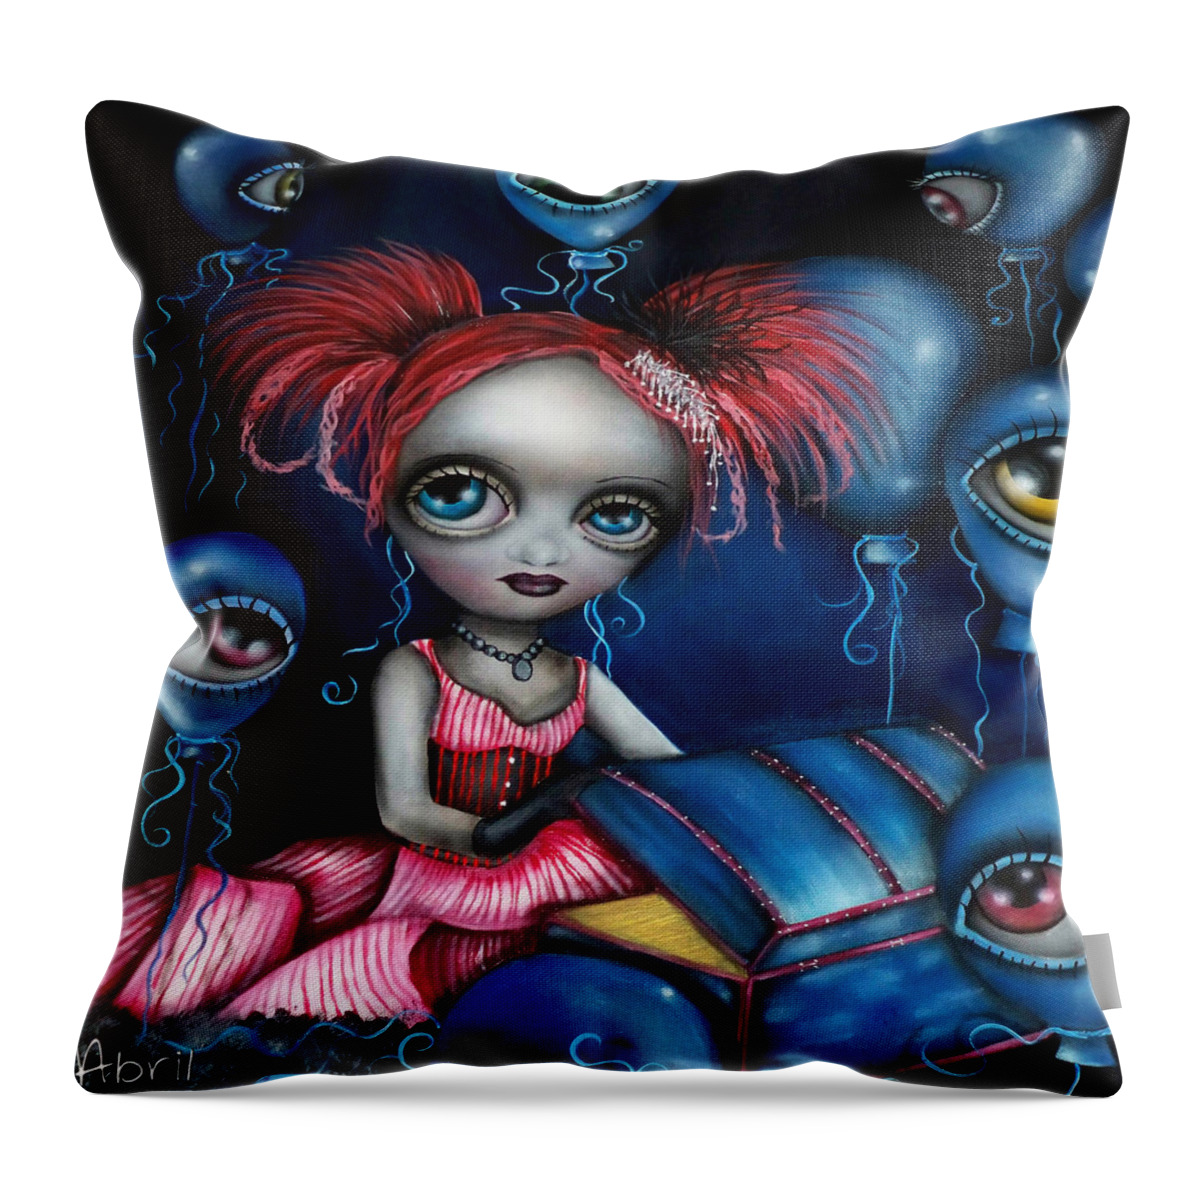  Throw Pillow featuring the painting Tranquilatwist by Abril Andrade